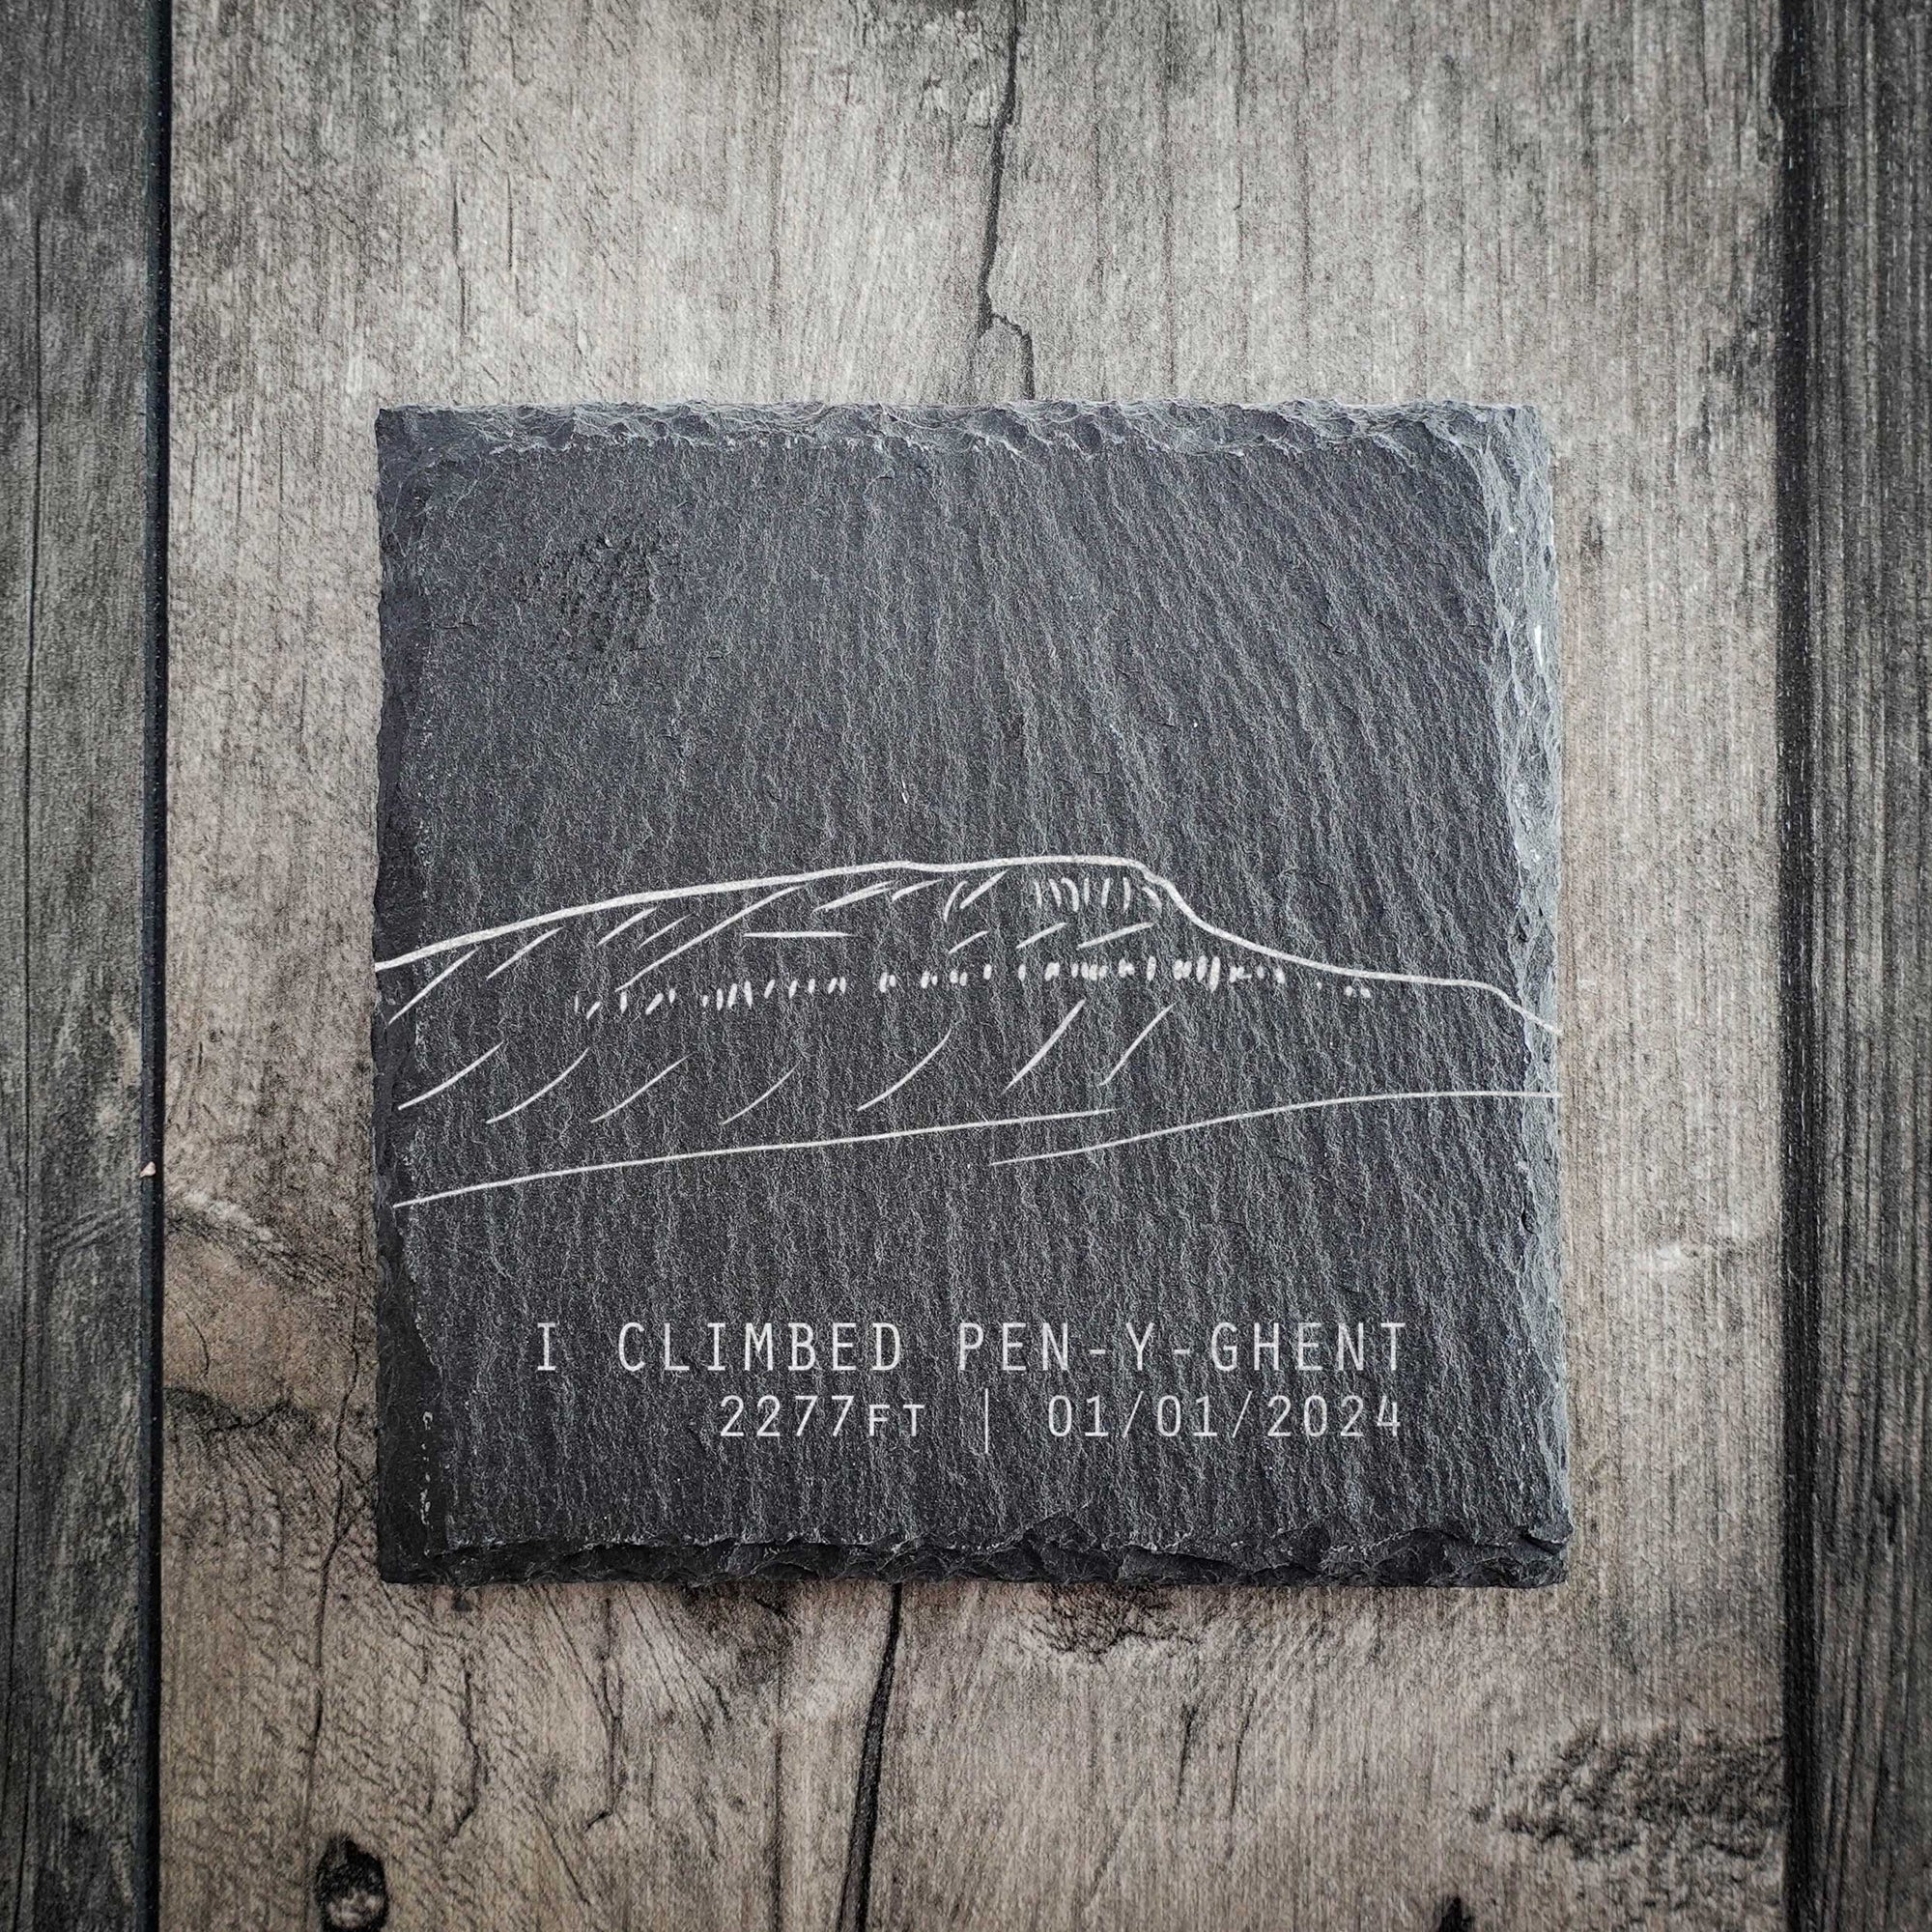 Custom "I Climbed Pen-y-Ghent" Slate Coaster – Add Date, Elevation, or Any Text